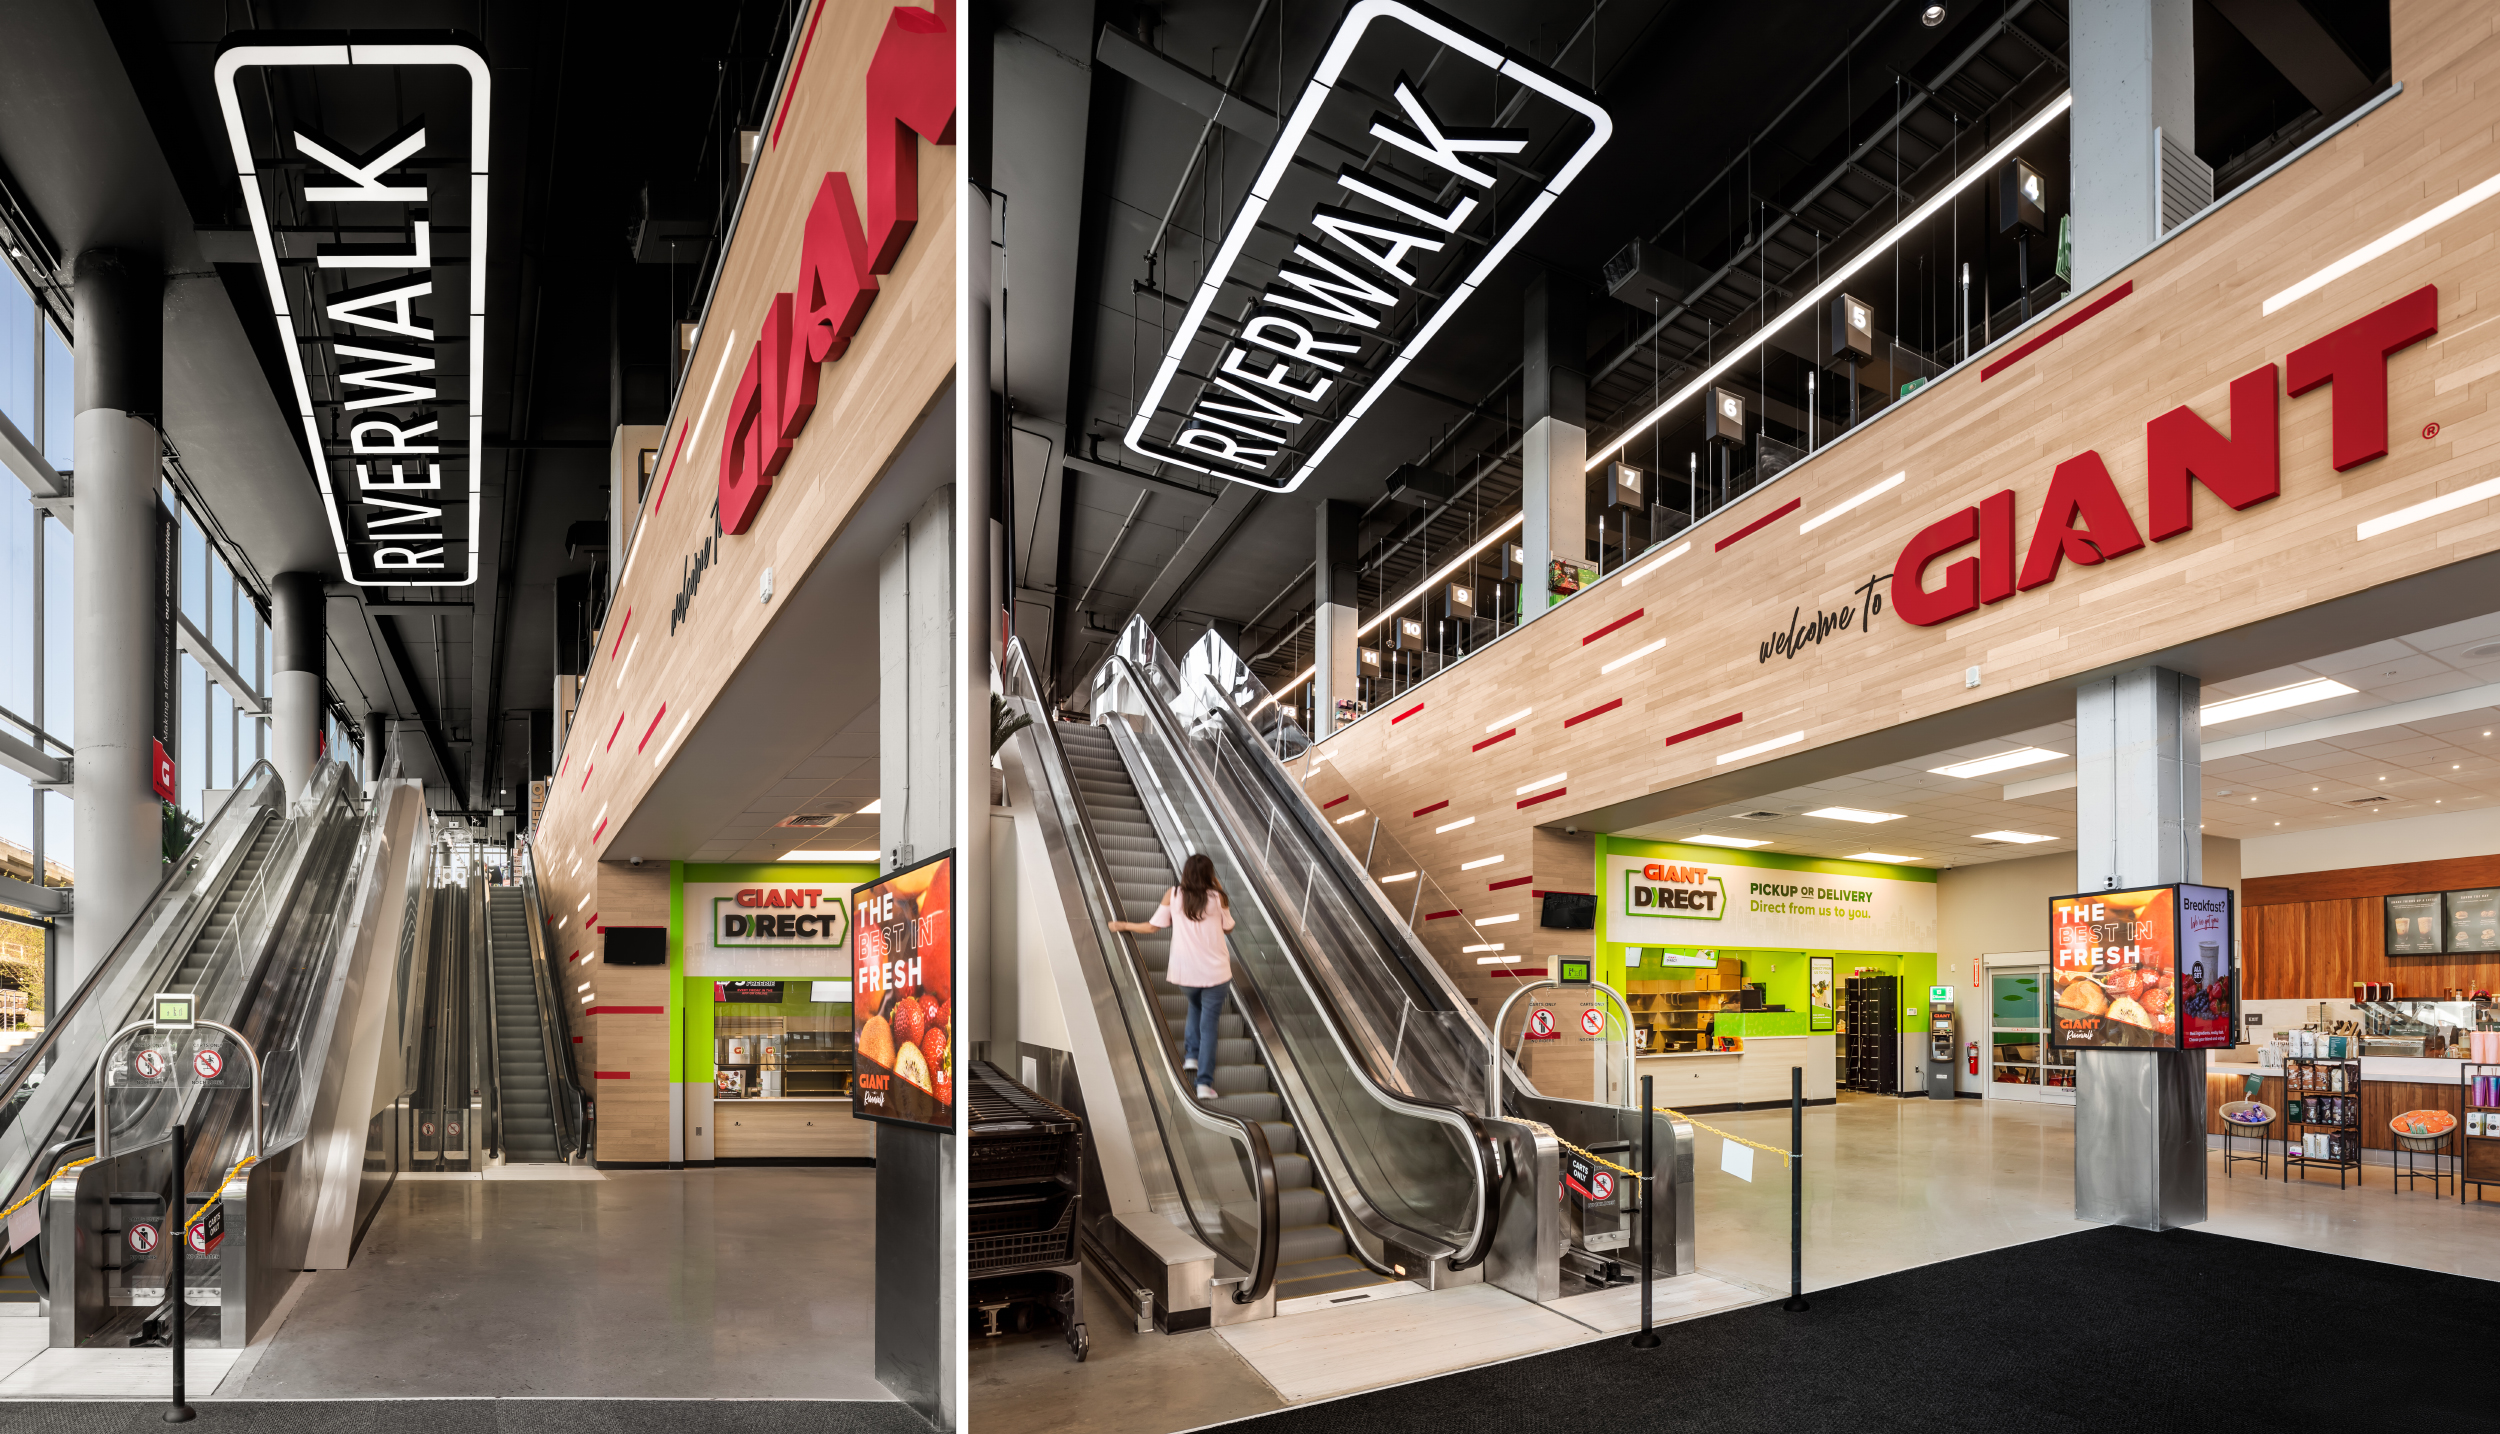 Giant’s second floor is accessible via escalators, highlighted by striking suspended signage.